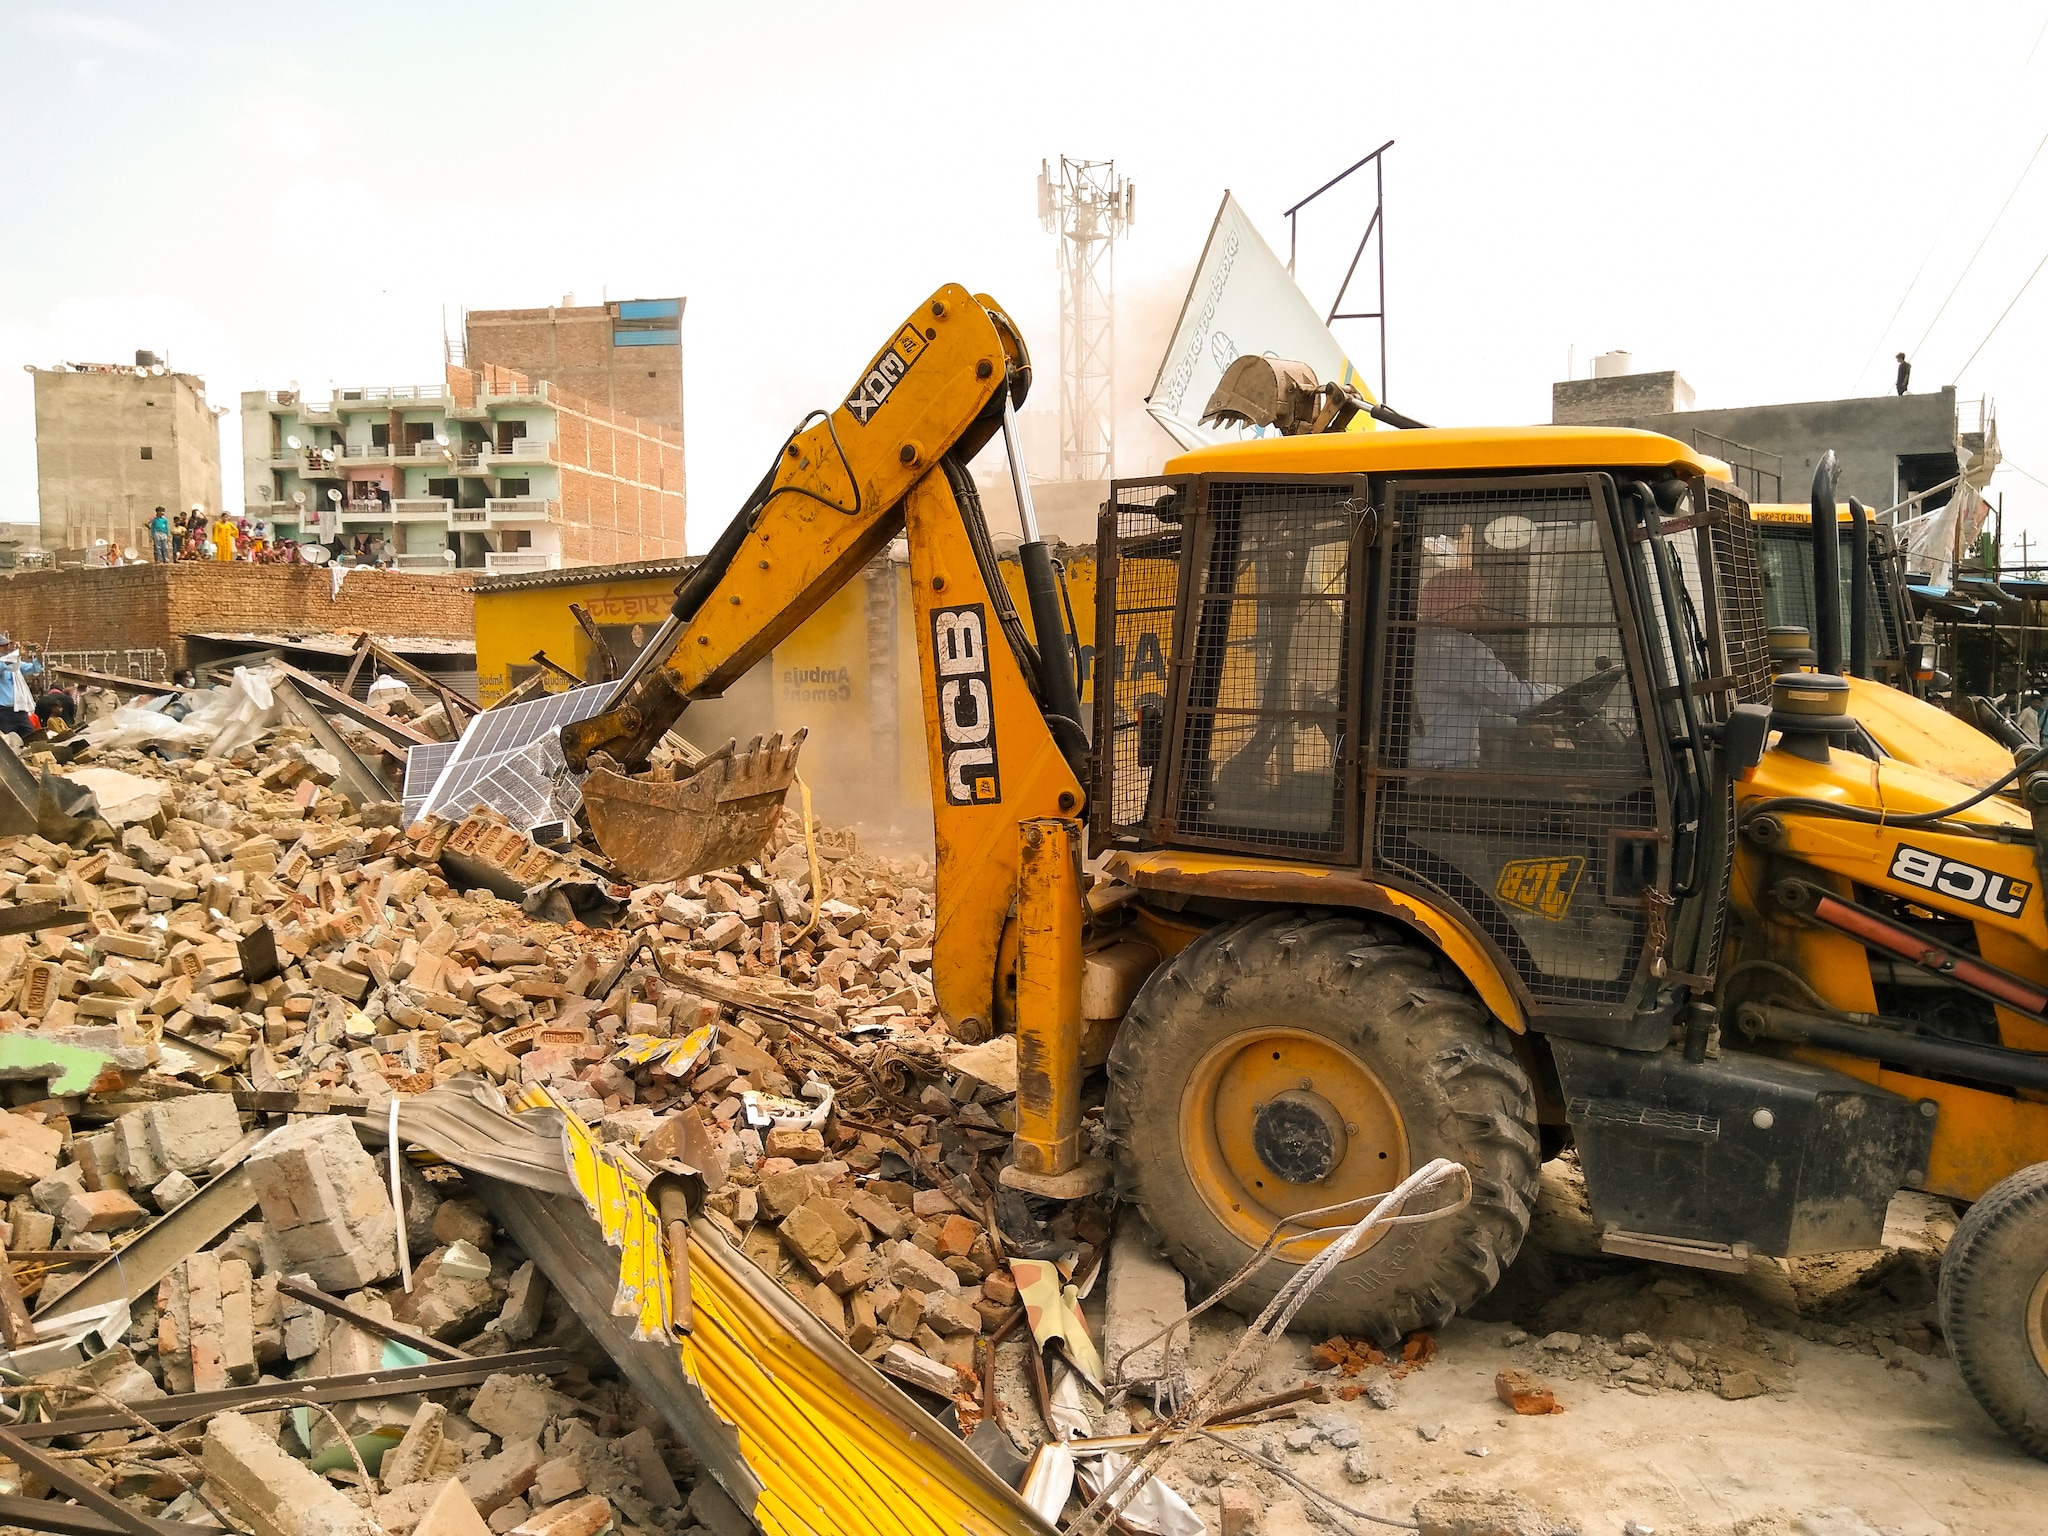 The bulldozer has now made its way into the national capital as the NDMC will carry out an anti-encroachment drive on Wednesday in Jahangirpuri, where clashes broke out during a Hanuman Jayanti procession, and has asked the Delhi Police to provide at least 400 personnel to maintain law and order.  (Shutterstock Image for Representation)